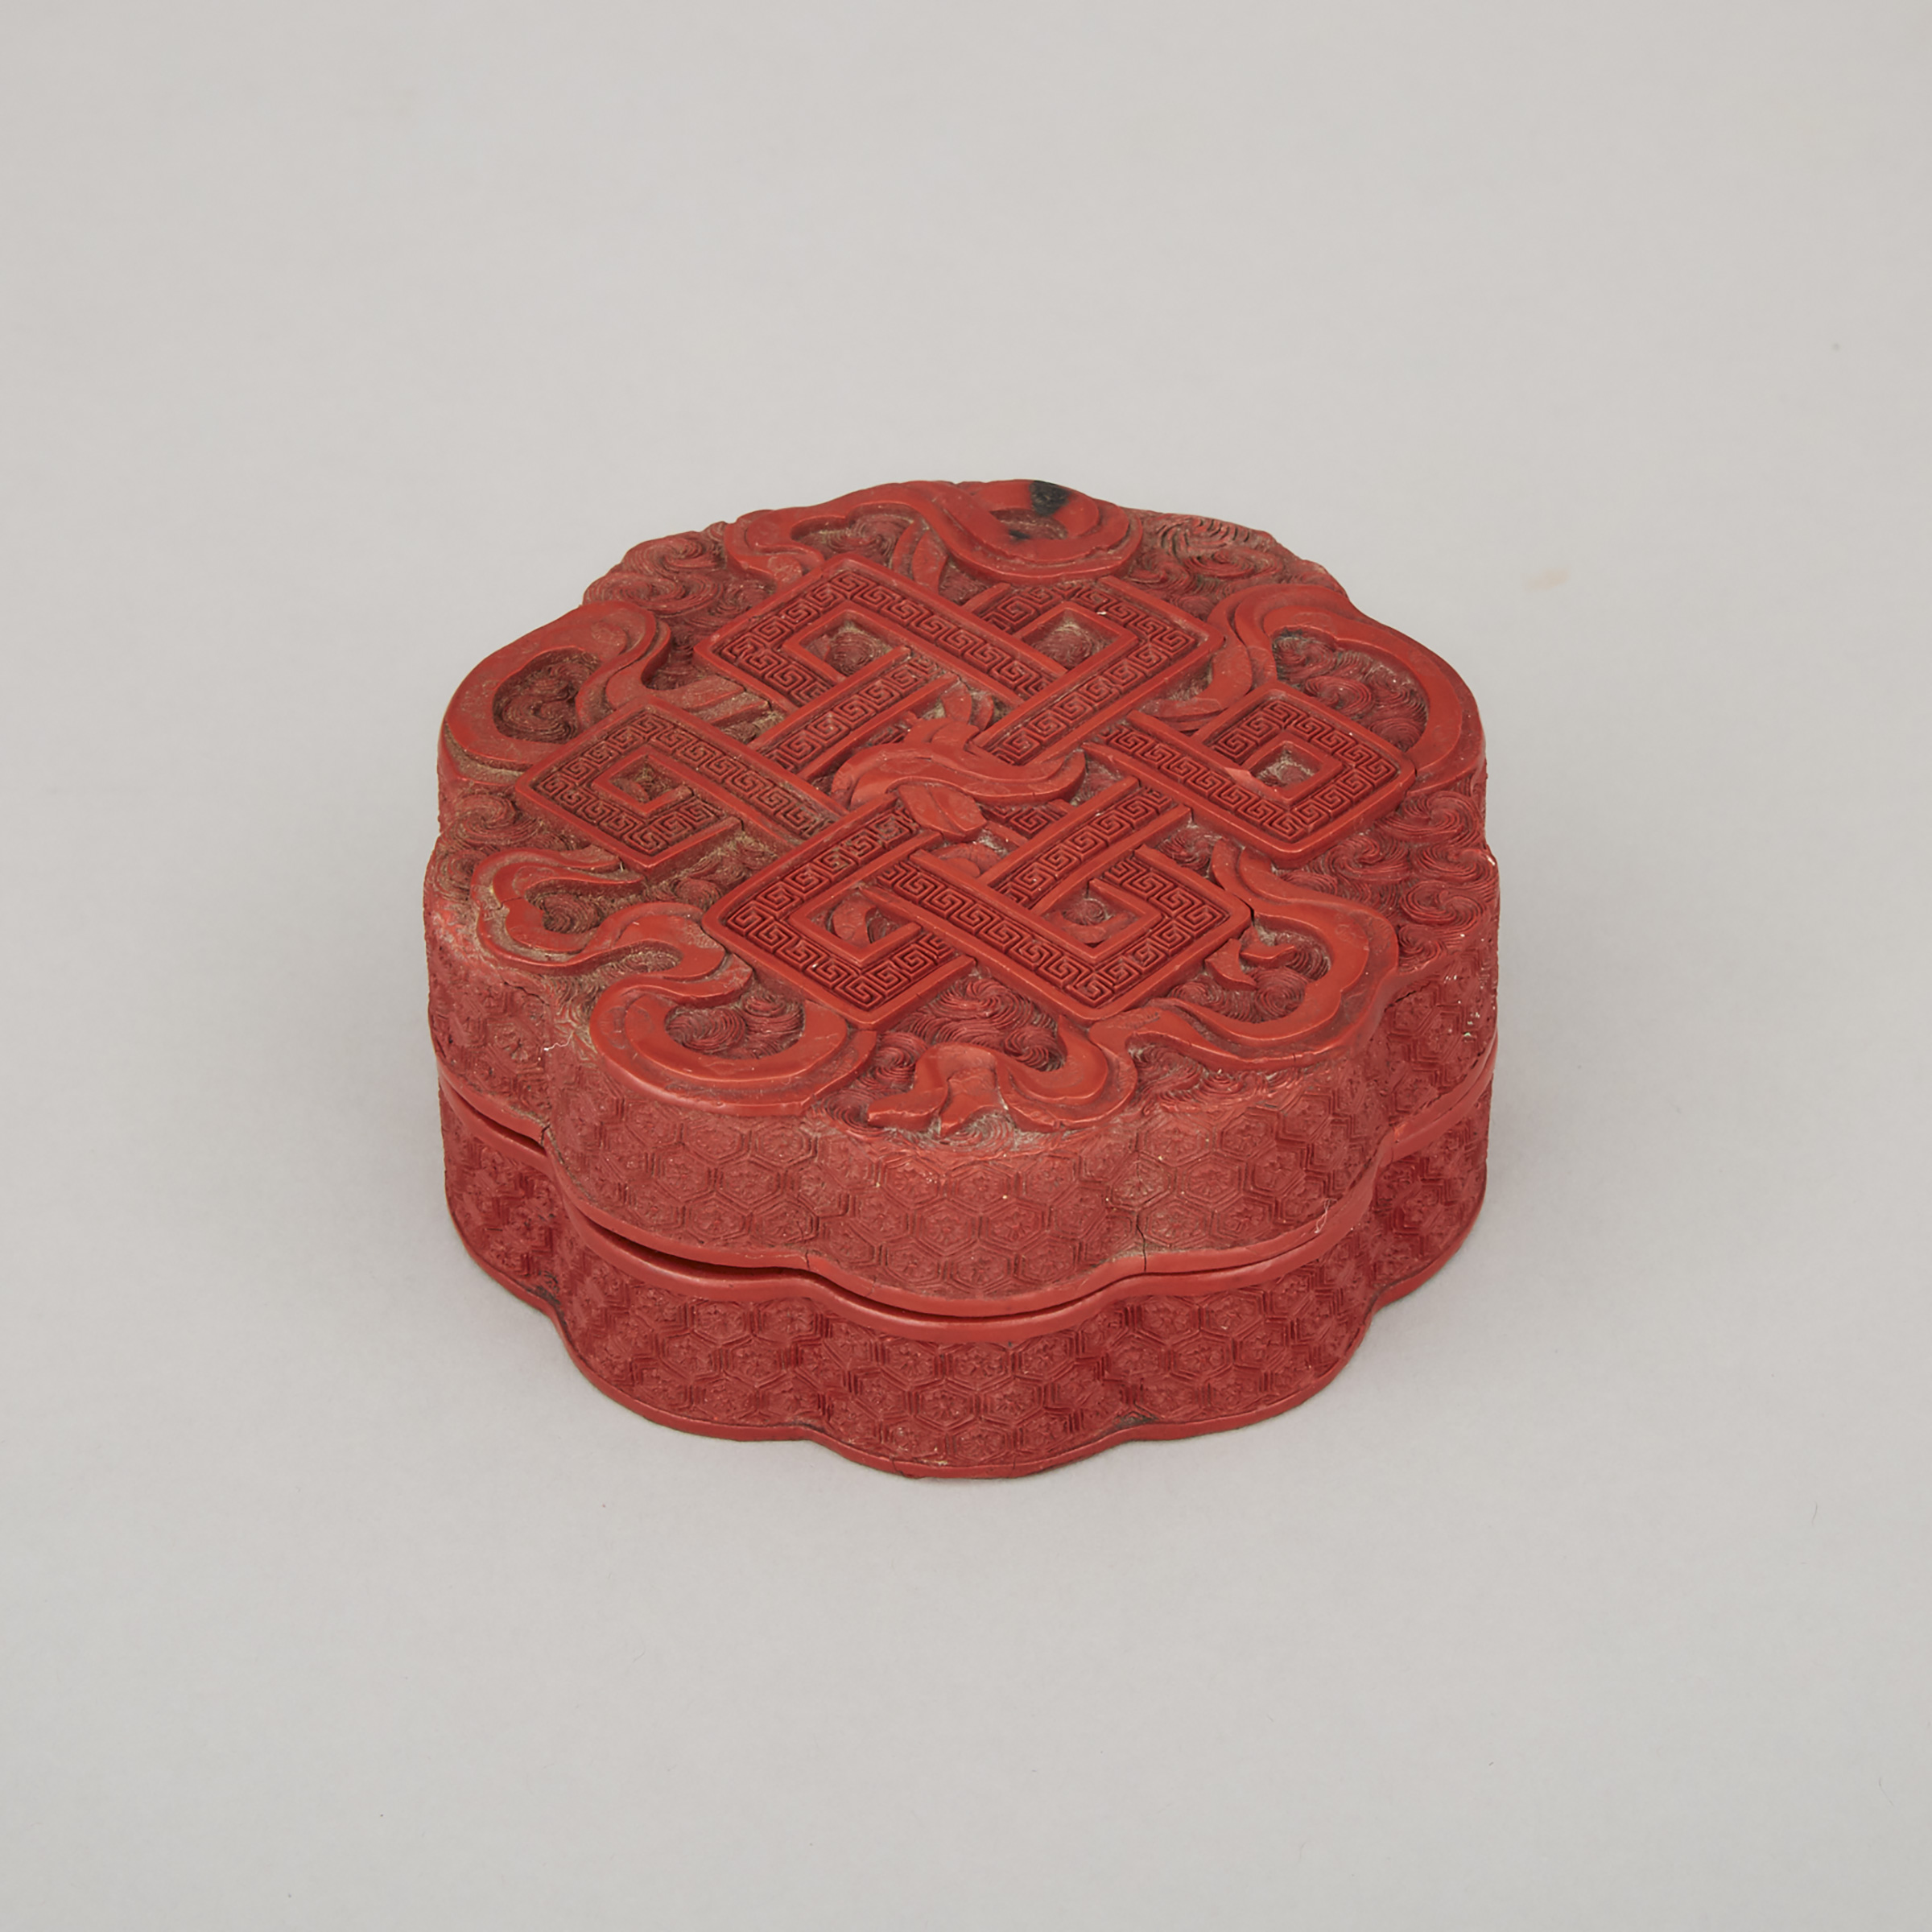 A Cinnabar Lacquer 'Endless Knot' Box and Cover, Qing Dynasty, 18th Century